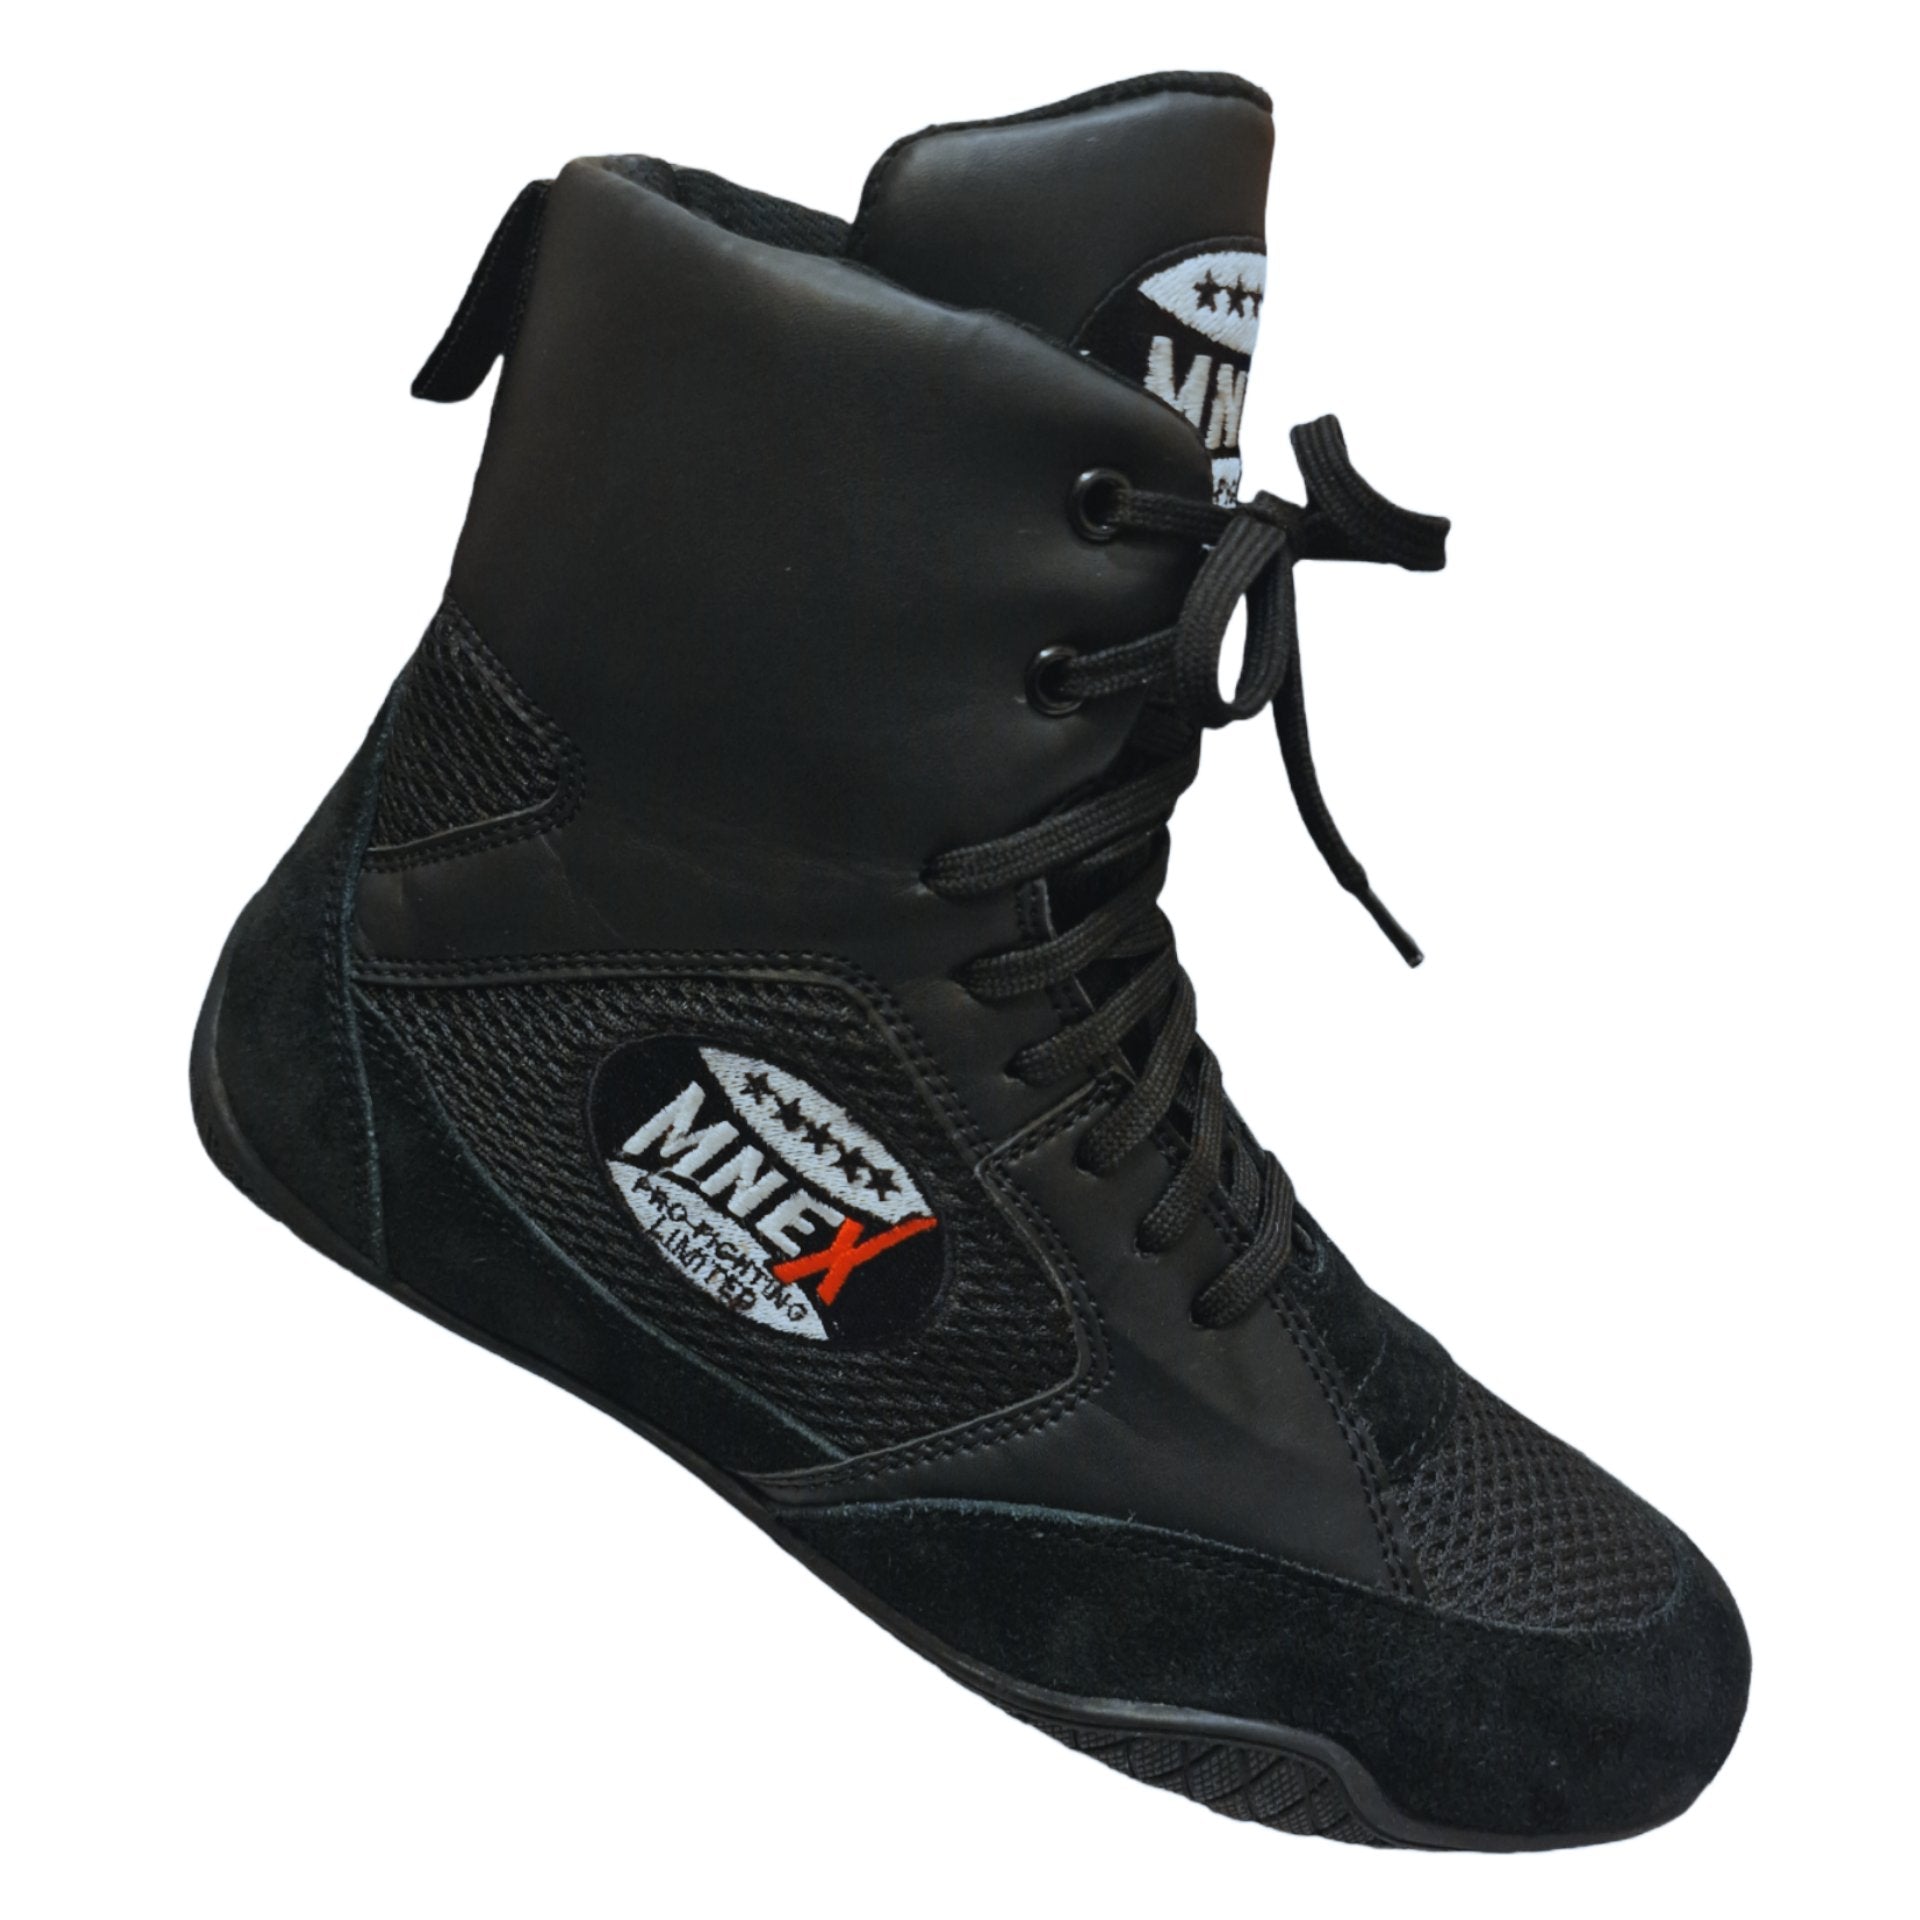 Our Shoes | Boxing Shoes| Wrestling Shoes| MMA Shoes Combat sport shoe - MNEX PRO FIGHTING LIMITED